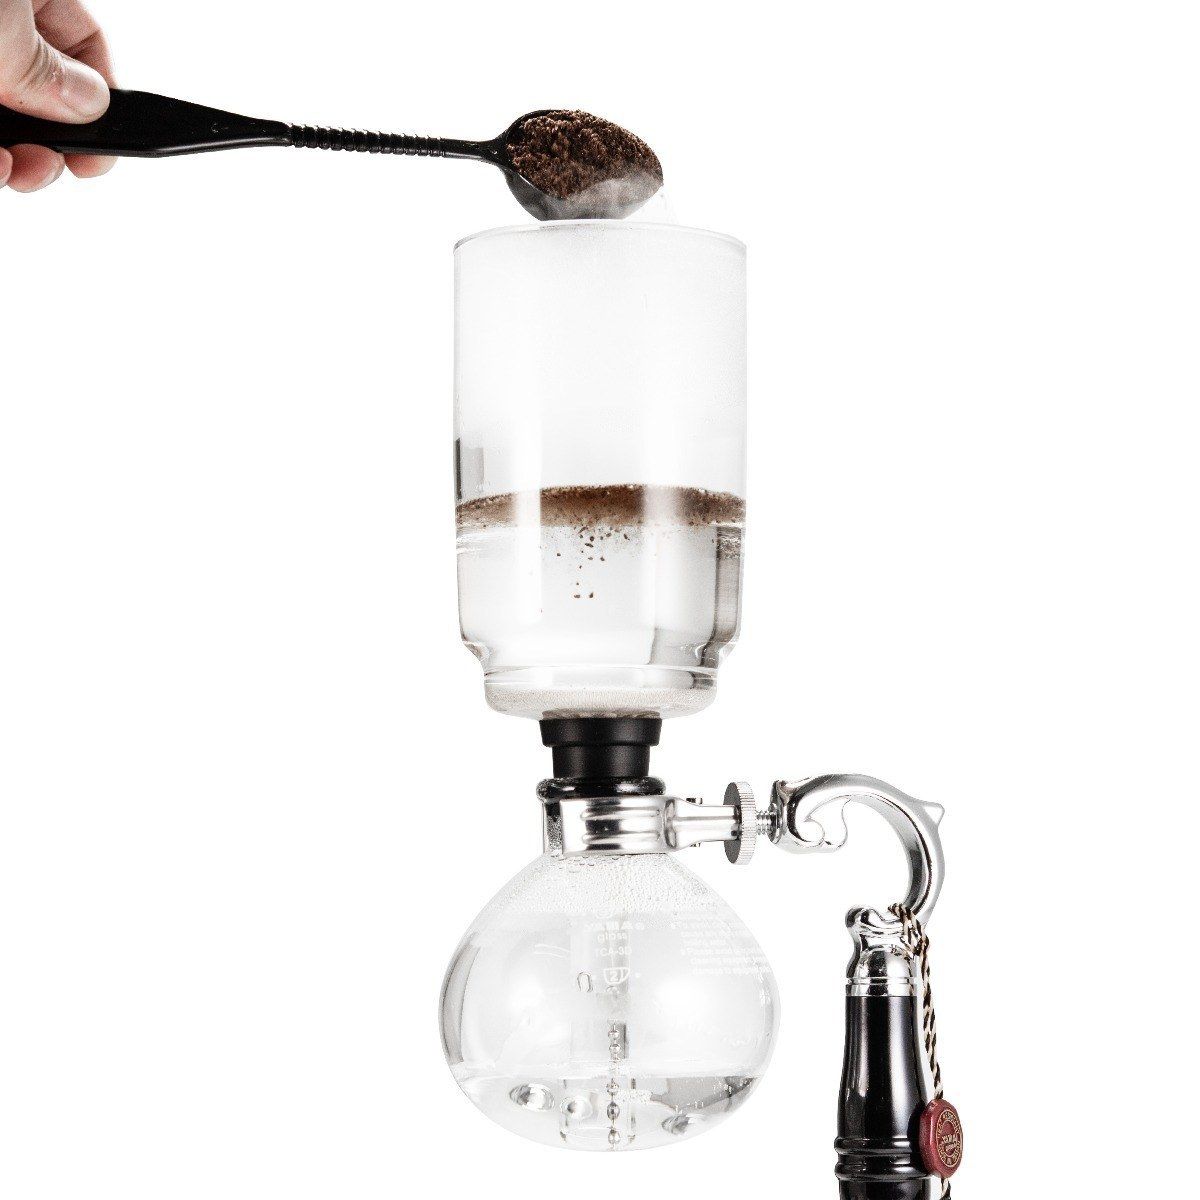 Amarine Made 5-Cup Coffee Syphon Tabletop Siphon (Syphon) Gravity Coffee  Maker Glass Siphon Vacuum Coffee Maker, 16 Ounce, Clear with Alcohol Burner